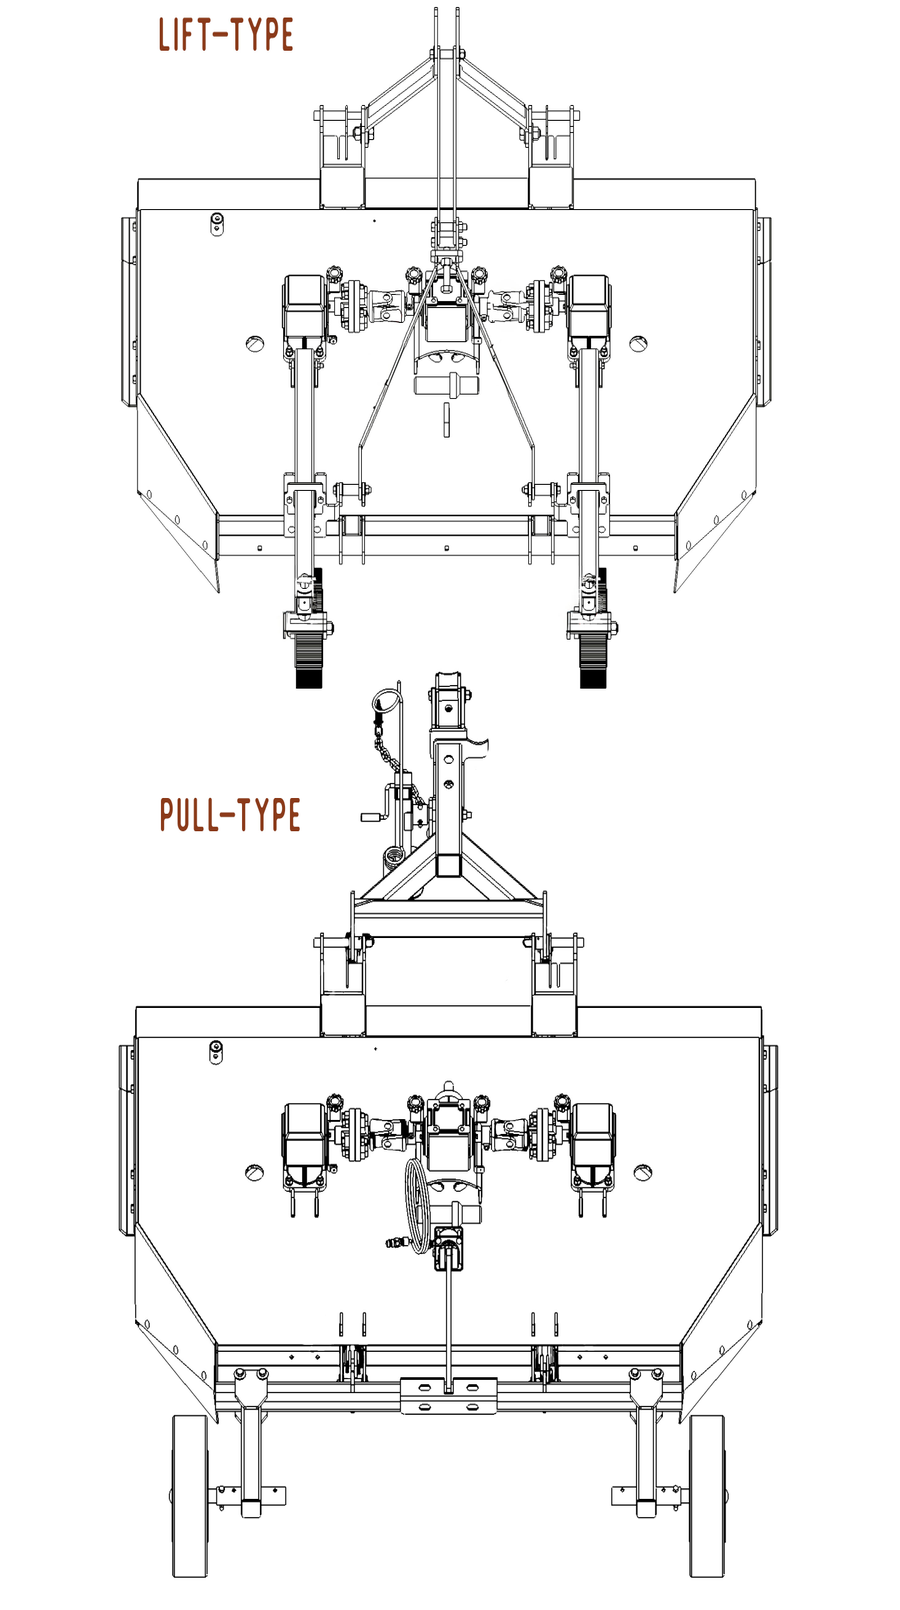 Diagram of product